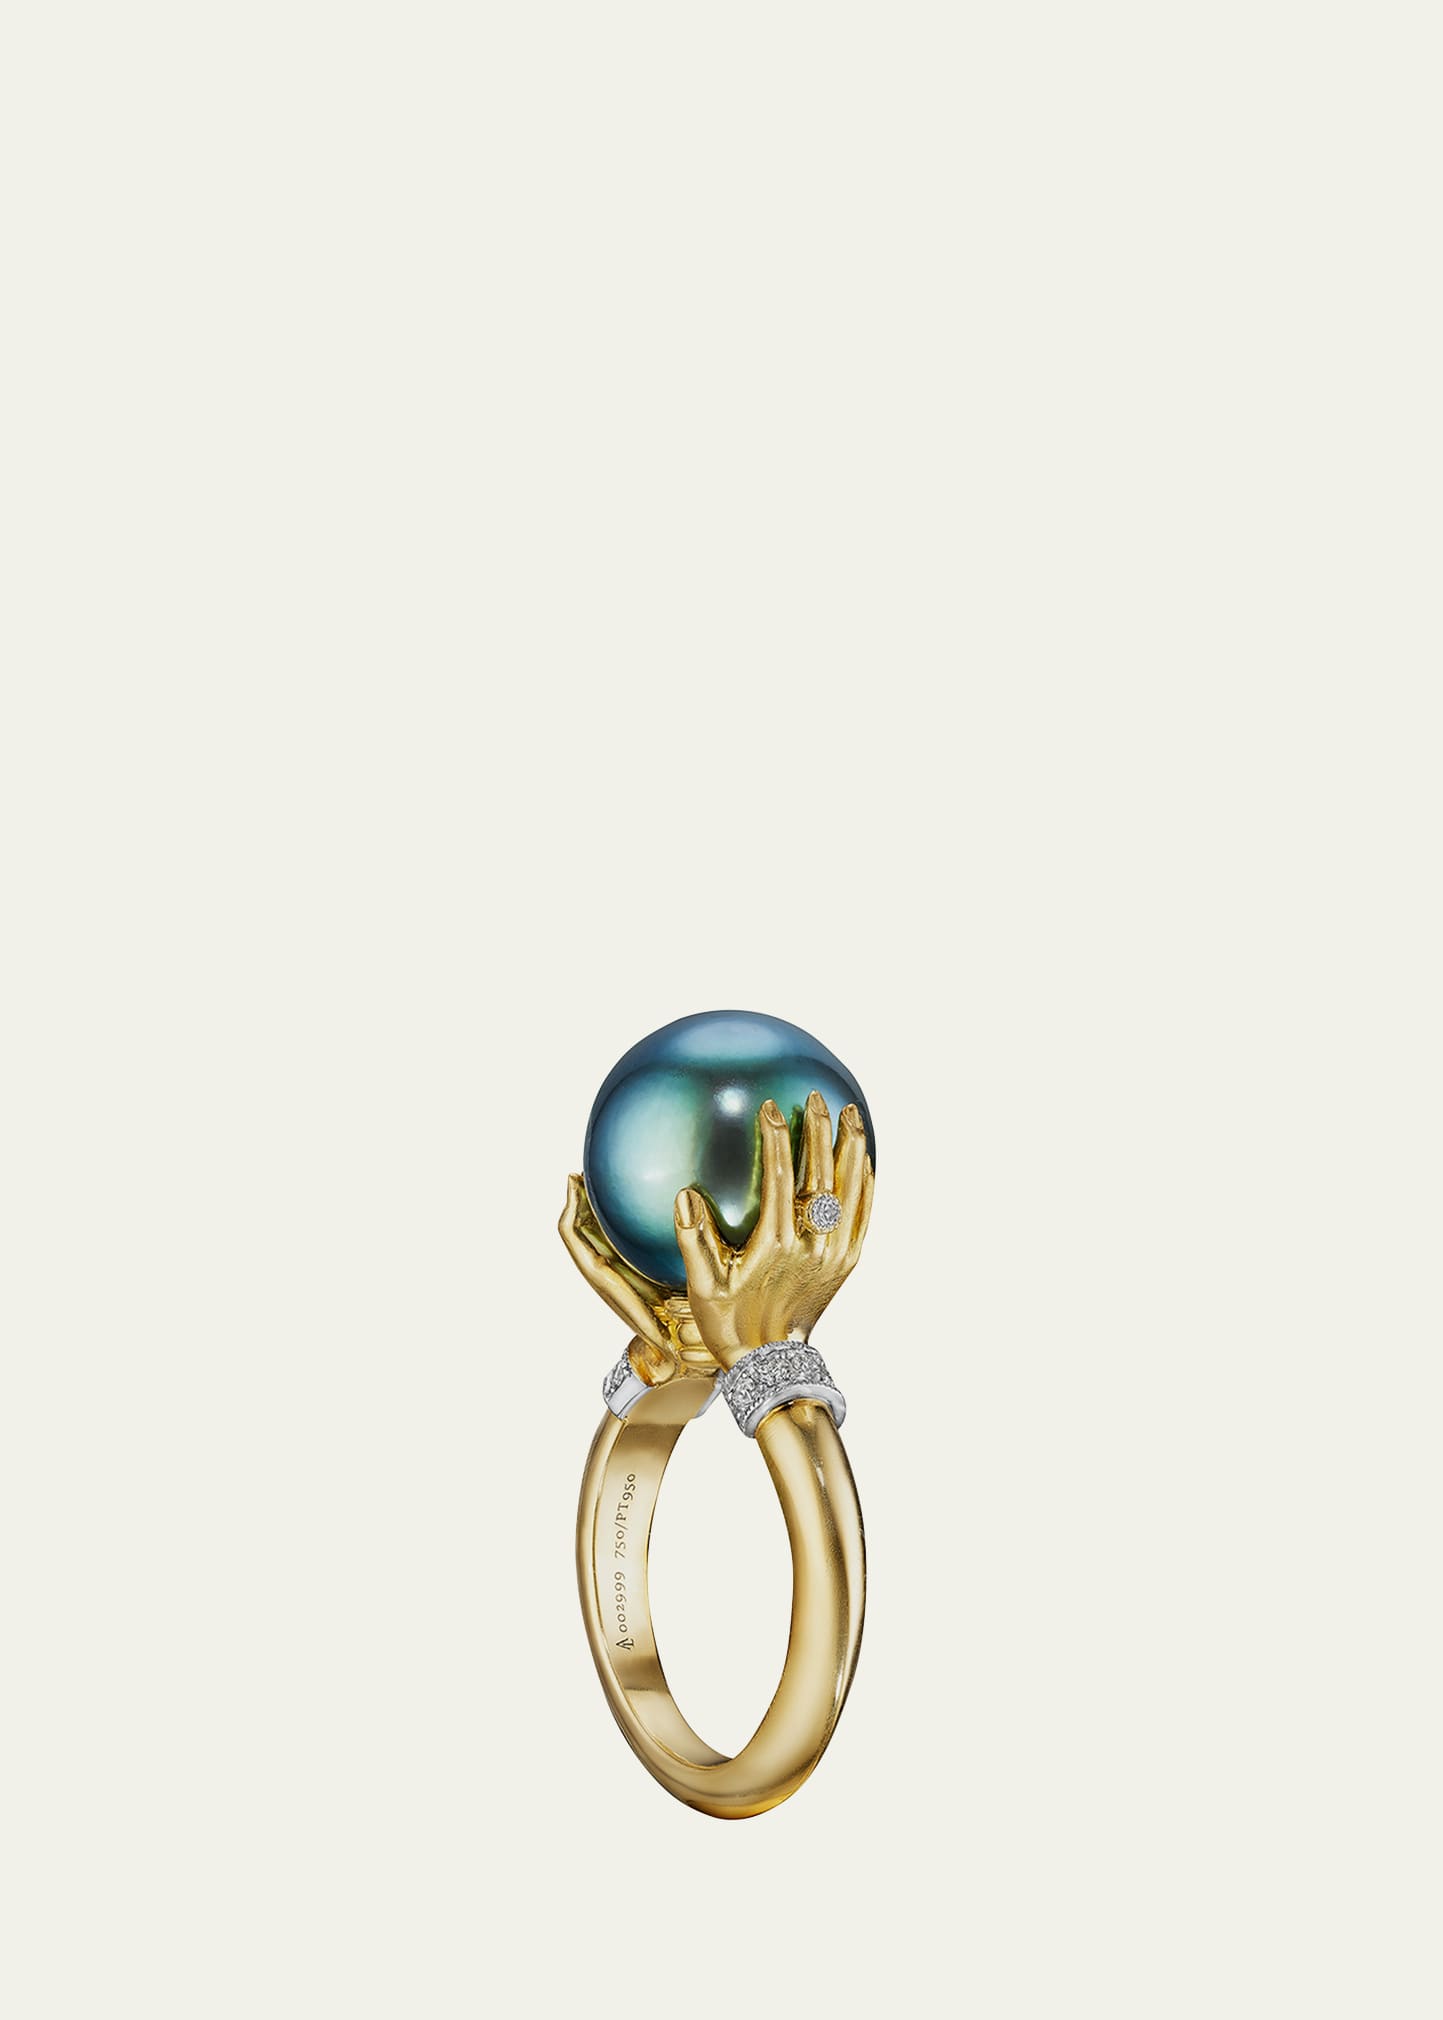 Anthony Lent Tahitian Pearl Adorned Hands Ring in 18k Yellow Gold